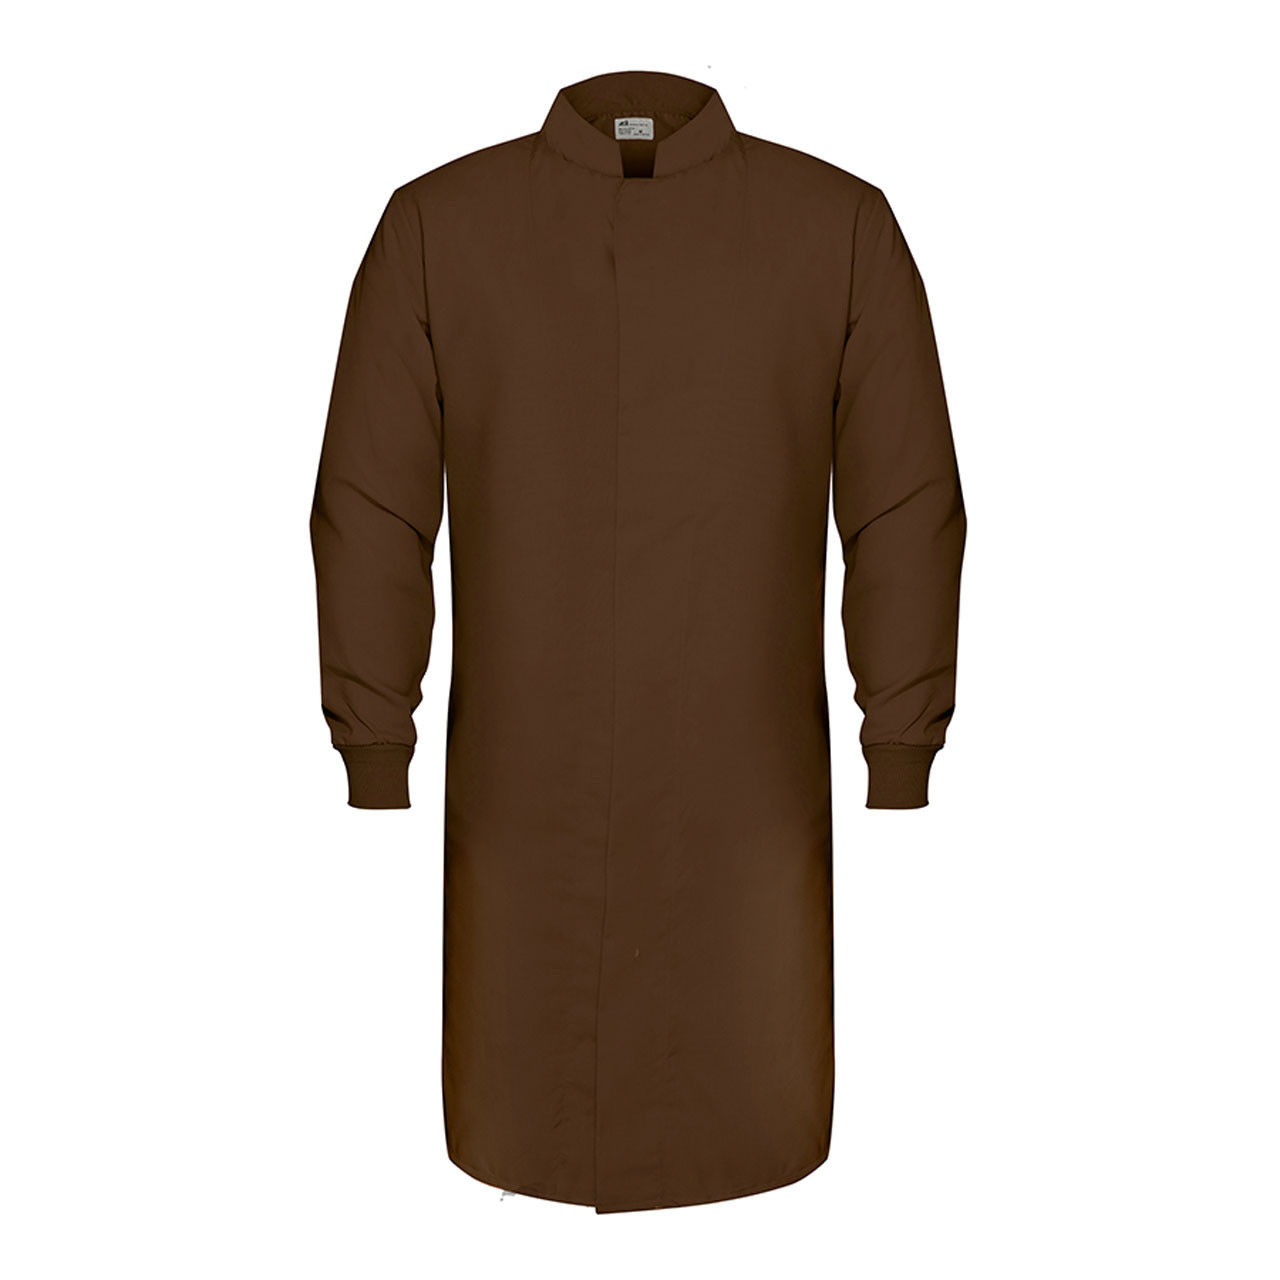 Is the ADI Unisex brown lab coat true to size?